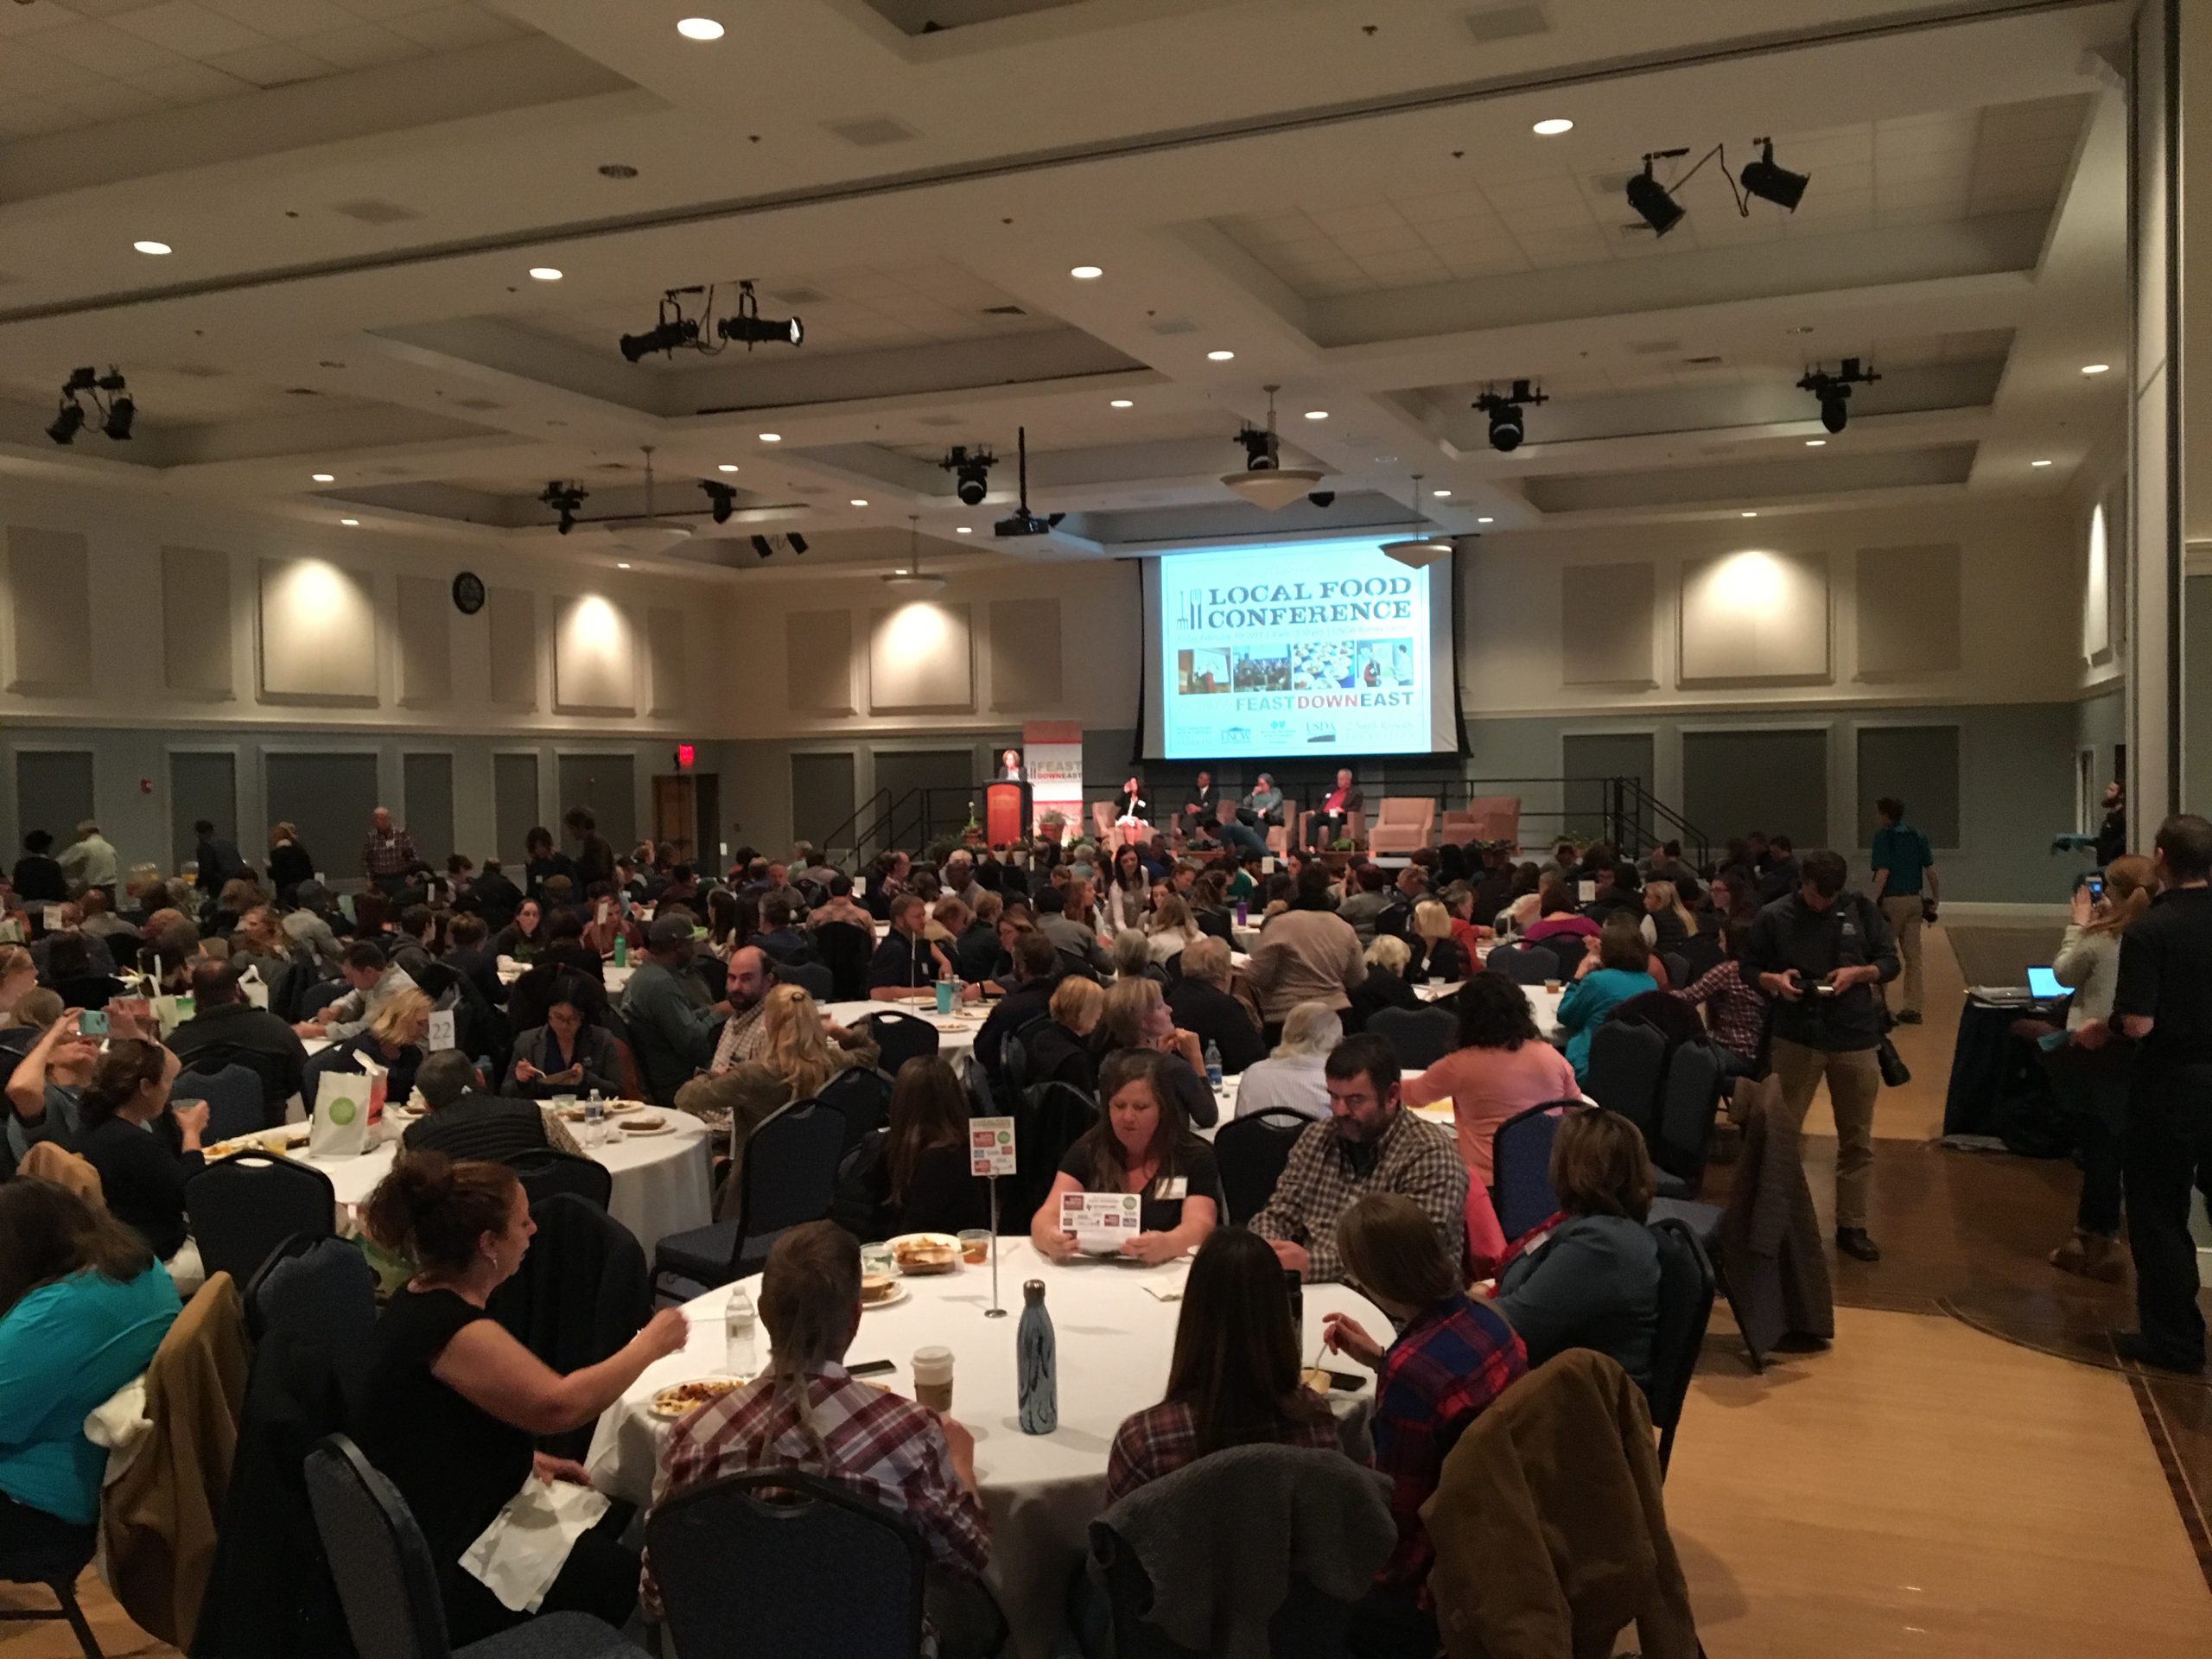 Raleighwood Media Group attends Feast Down East Local Food Conference